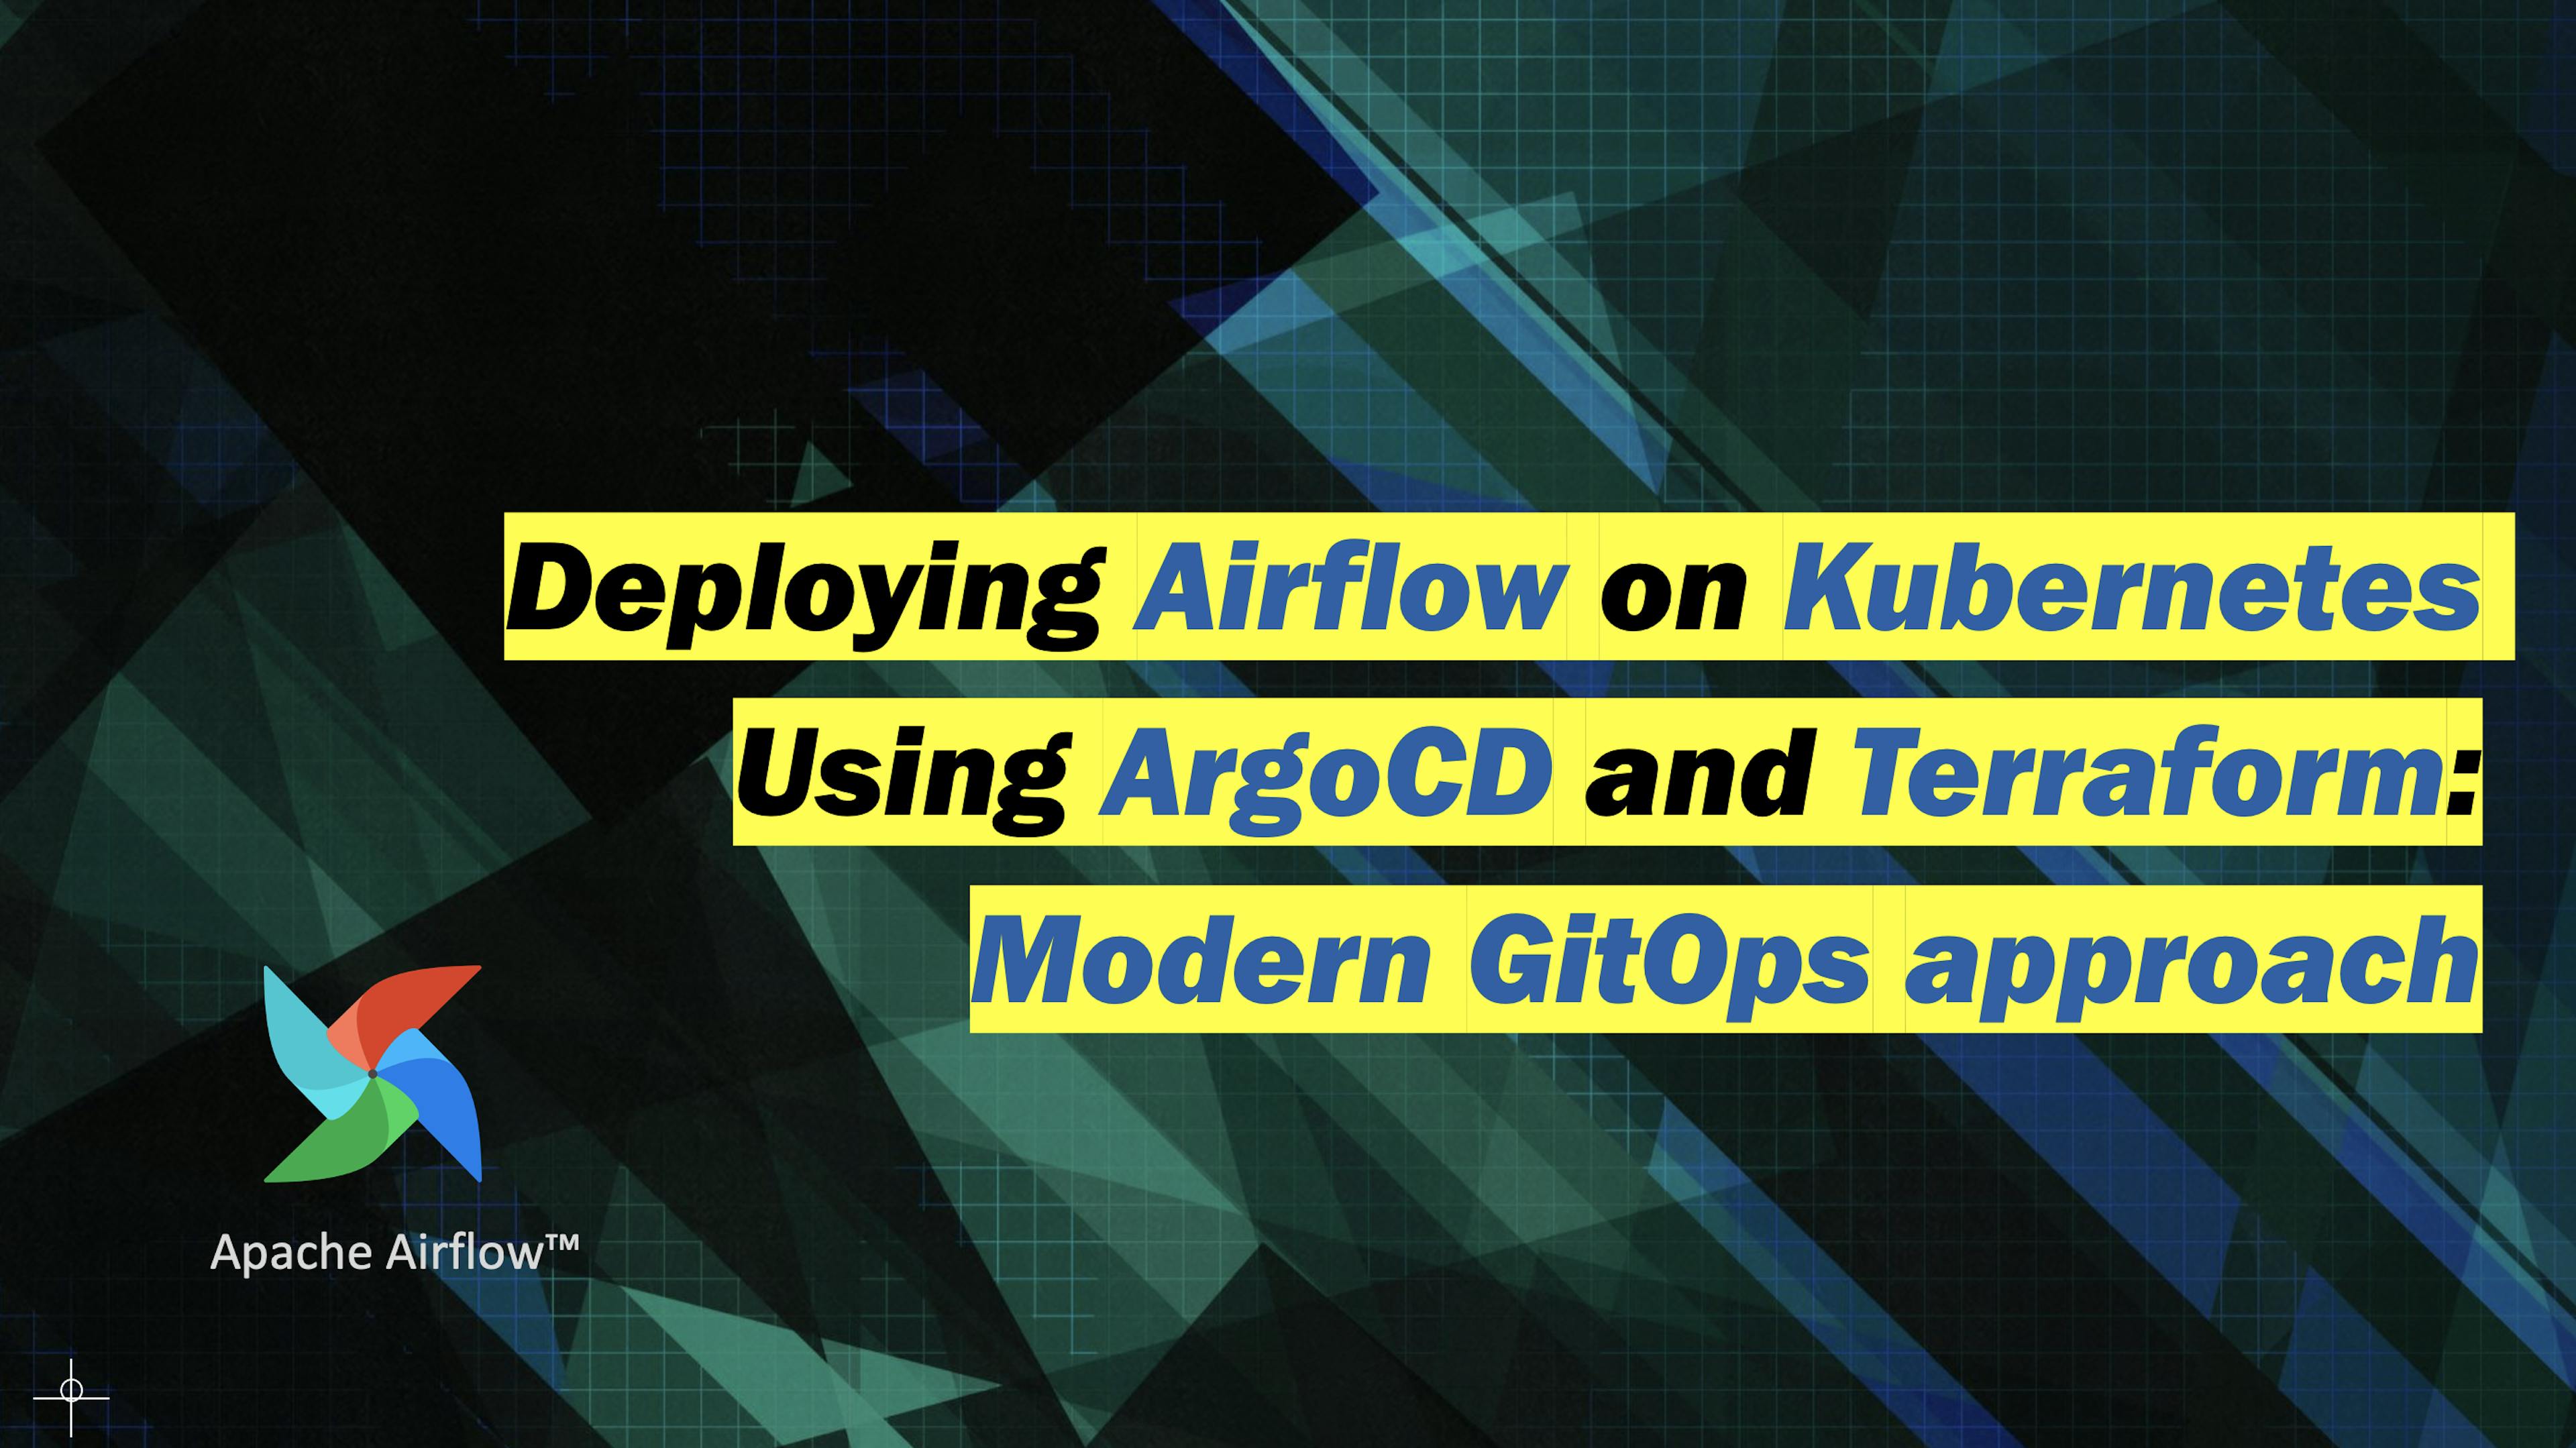 featured image - Deploying Airflow on Kubernetes Using ArgoCD and Terraform: Modern GitOps approach